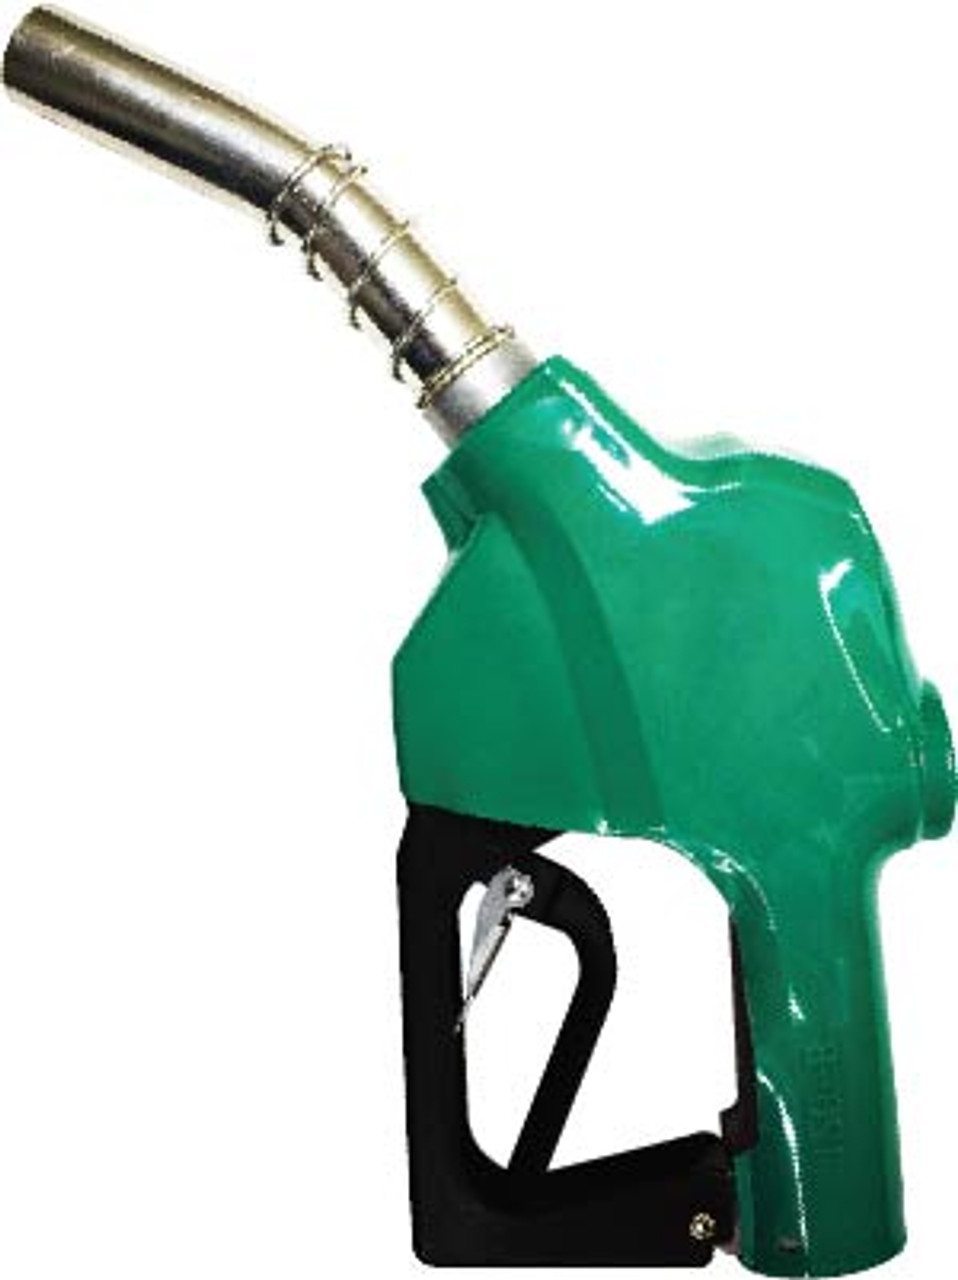 120B - 1" High Flow Diesel Nozzle with Automatic Shutoff and 2nd Check ValveColor: Green